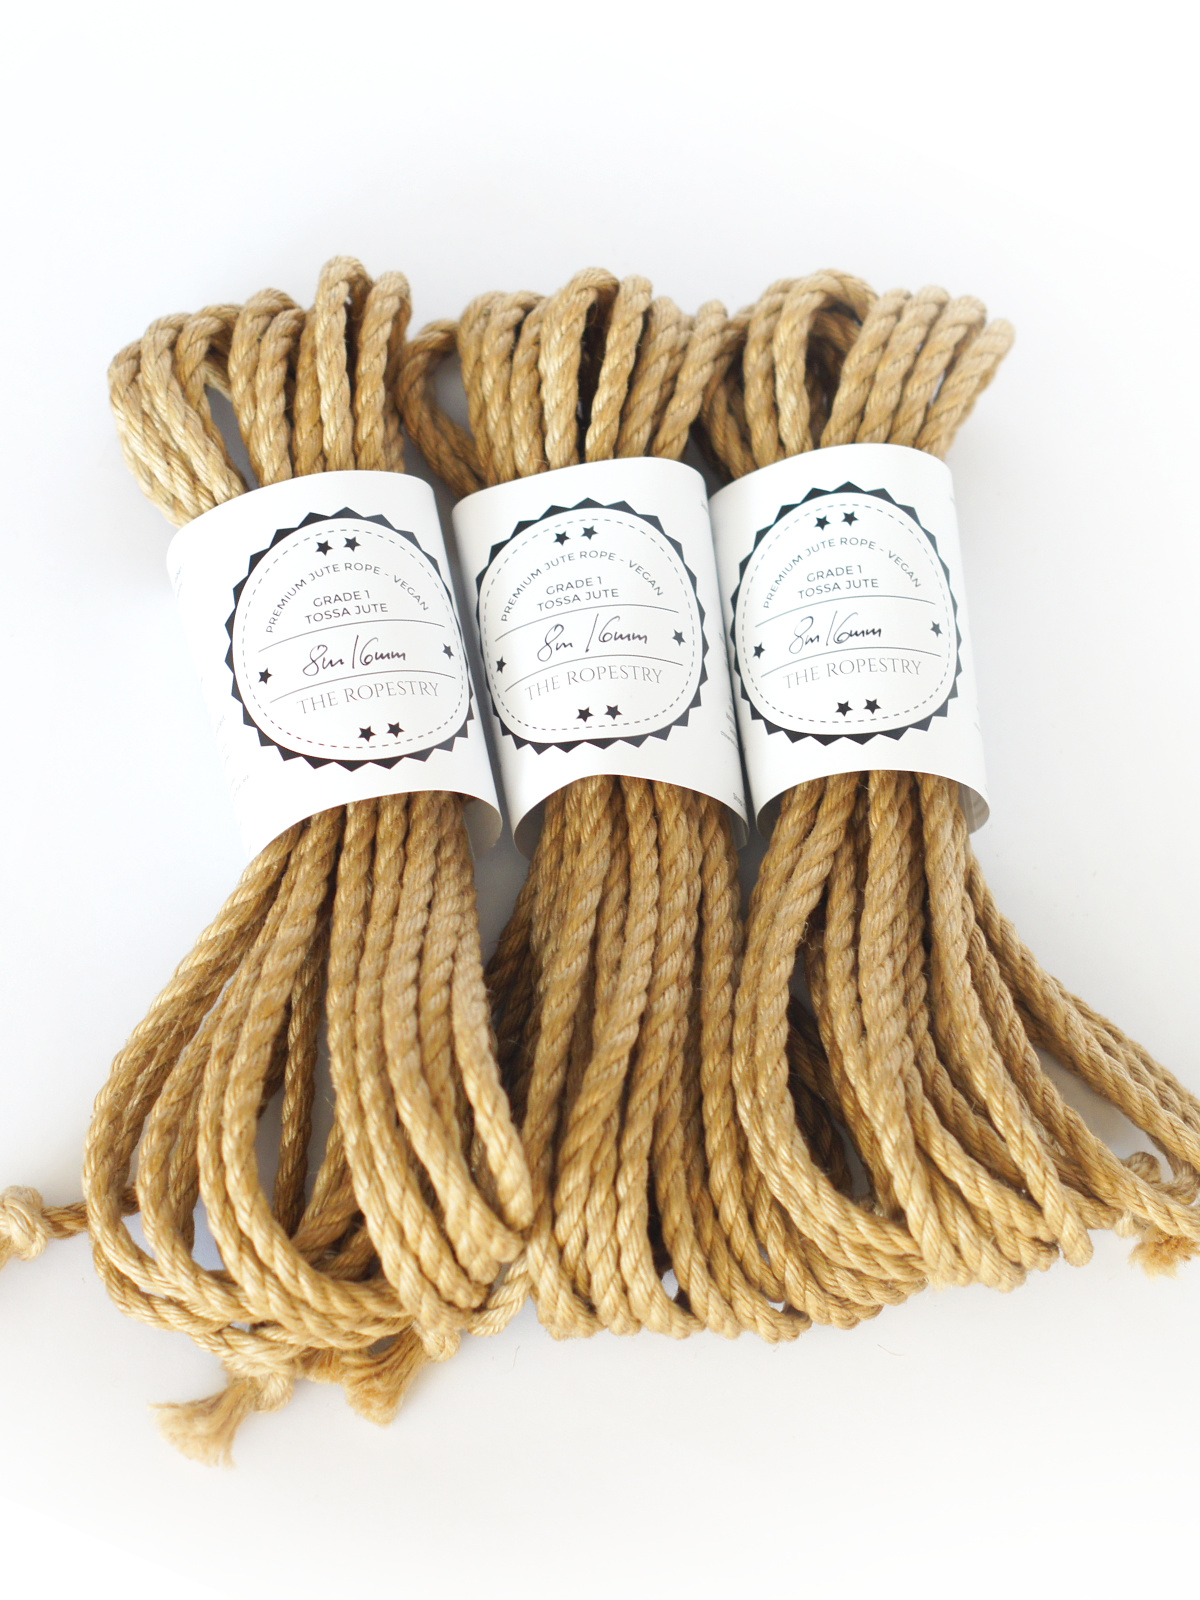 B-STOCK 3pc set, ∅ 6mm, 8m, jute rope, ready for use